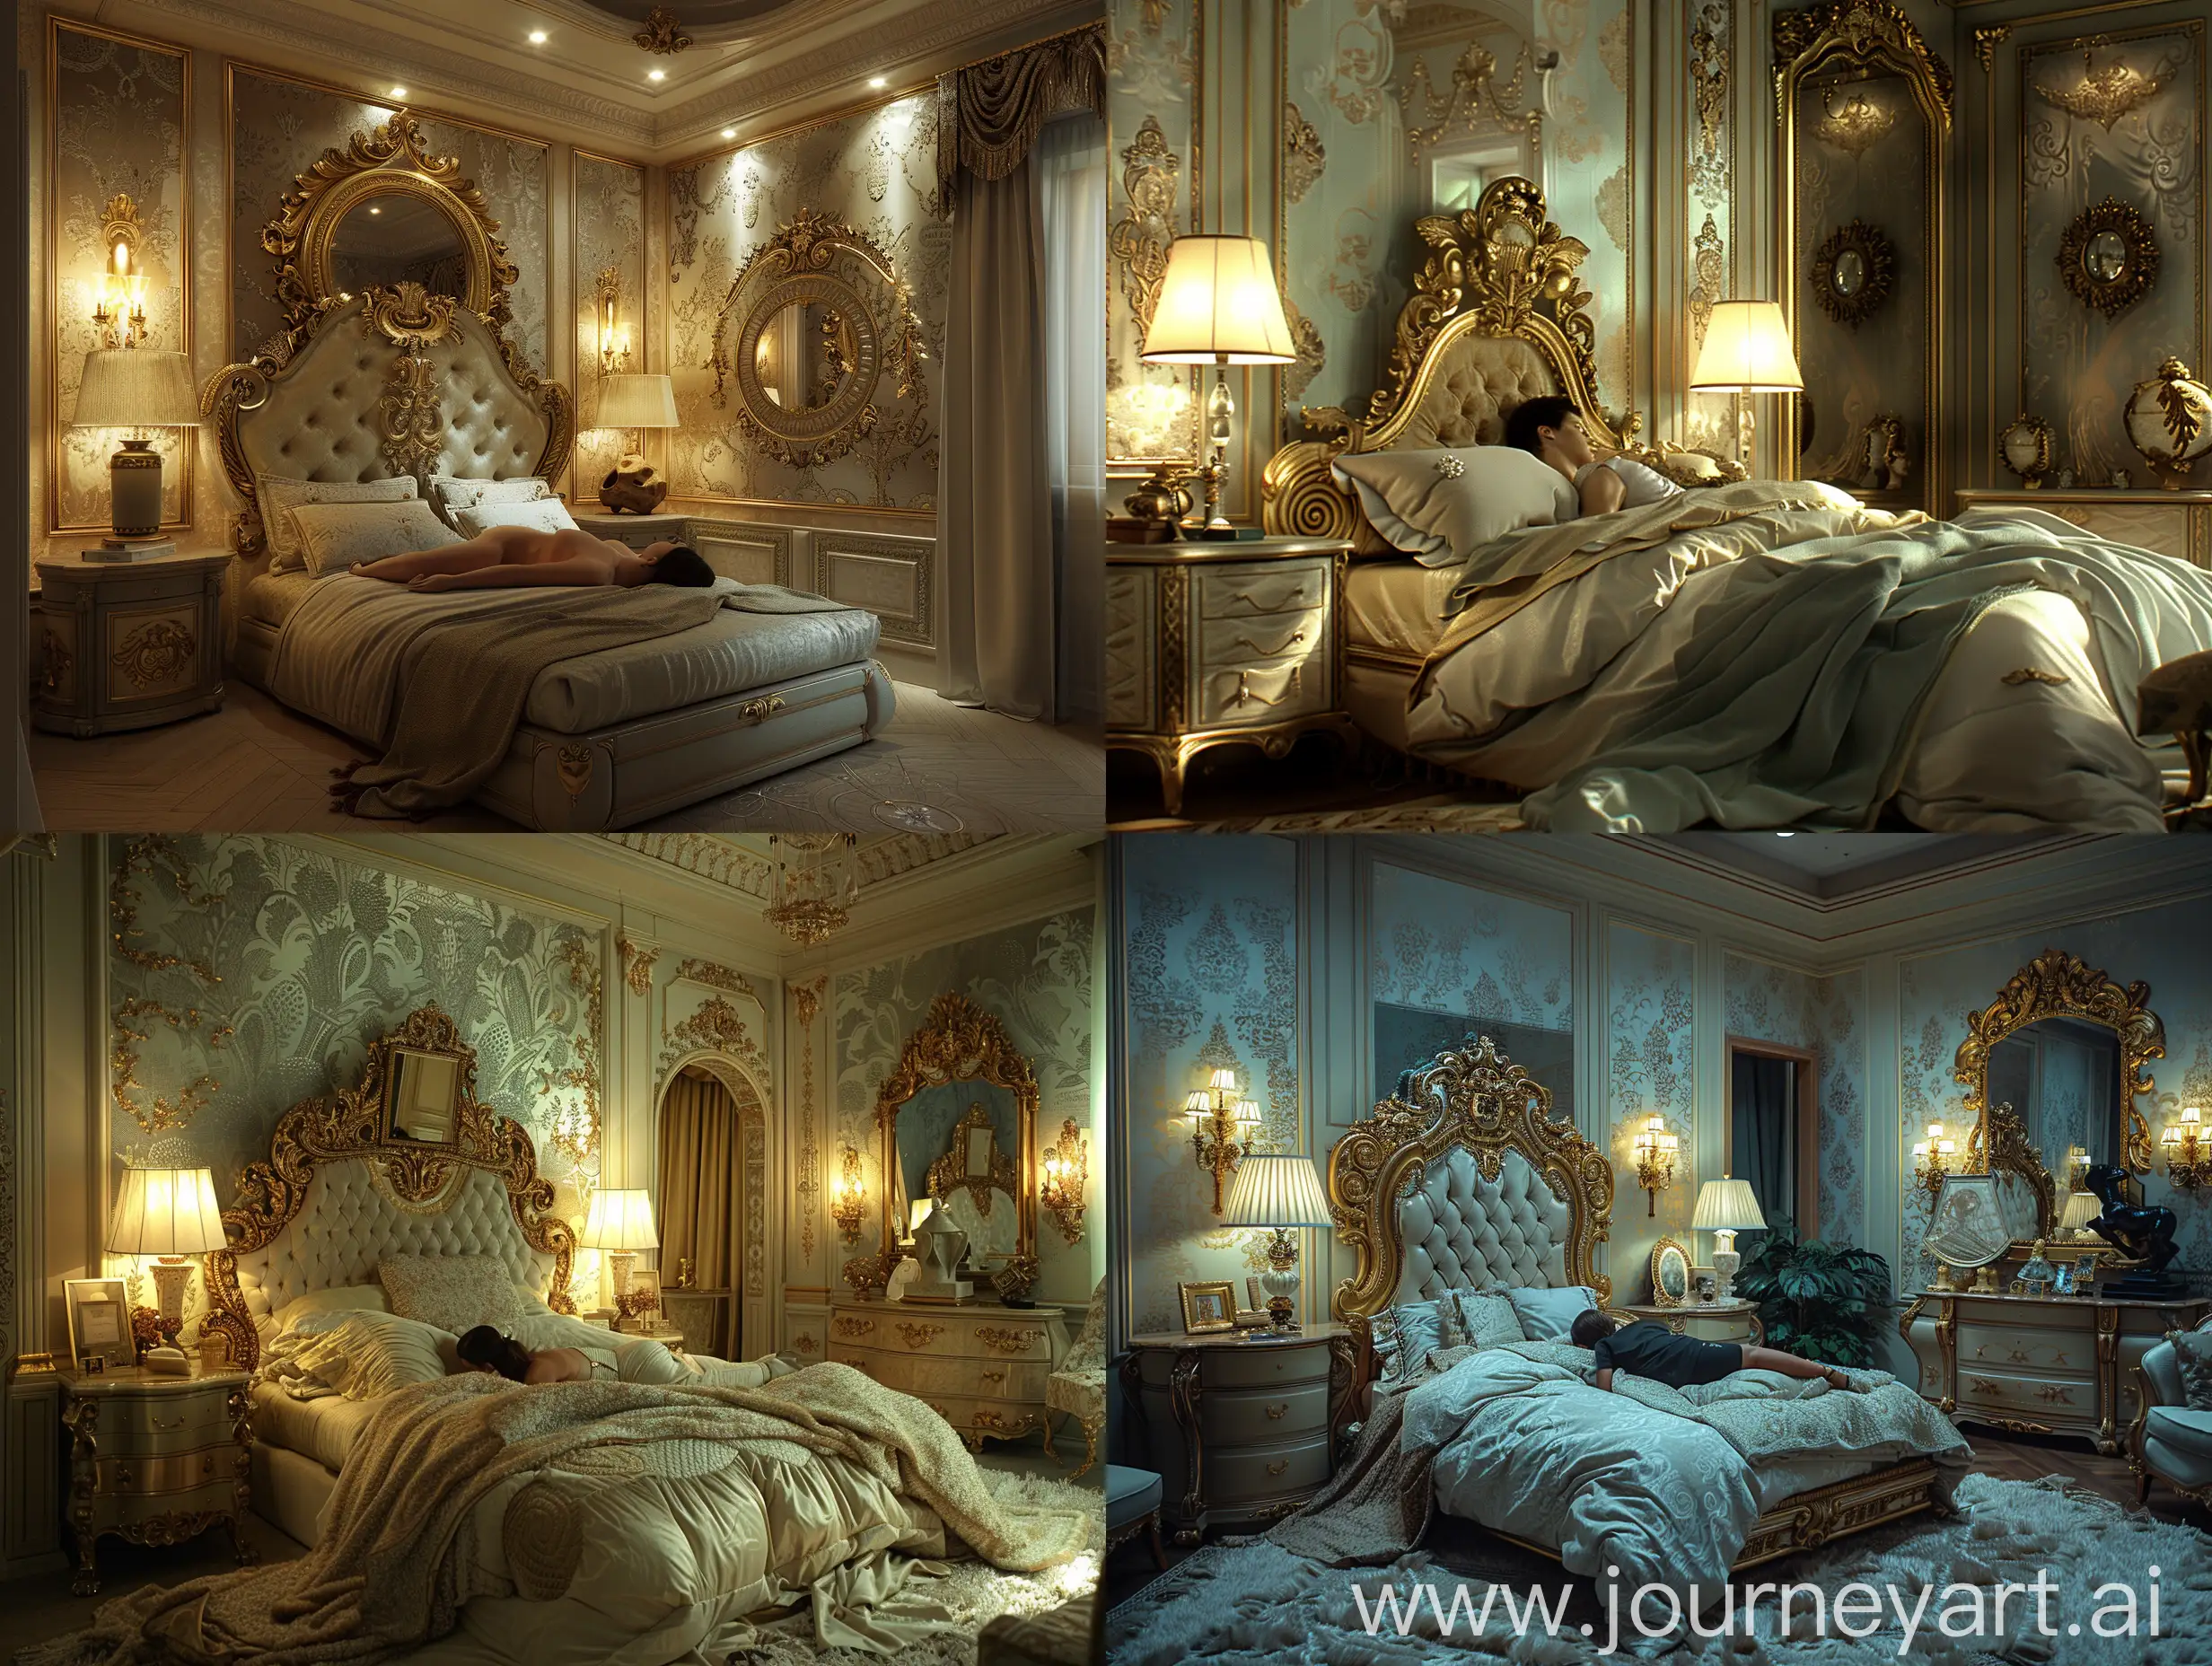 image shows a luxurious, dimly lit bedroom with classic and opulent design elements. There is a bed with an ornate golden headboard, a person lying down, a nightstand with a lamp, a large mirror with a golden frame, elegant wallpaper, and decorative elements like a sculpture or wall art. The room exudes a sense of classical luxury and comfort --style raw --stylize 750.